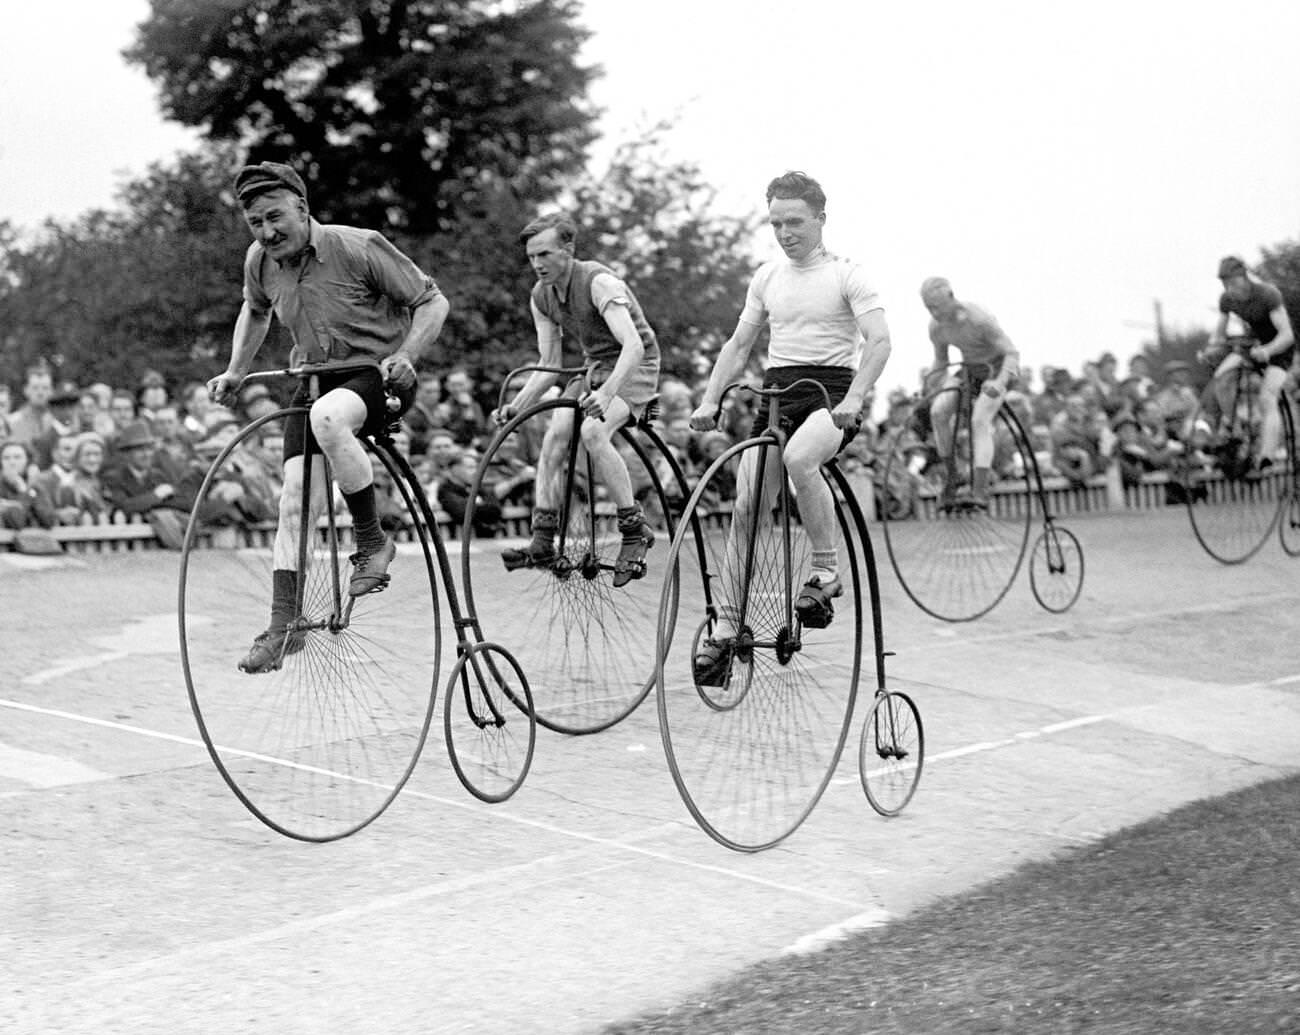 Contrasting bicycle technologies, riders, and eras.